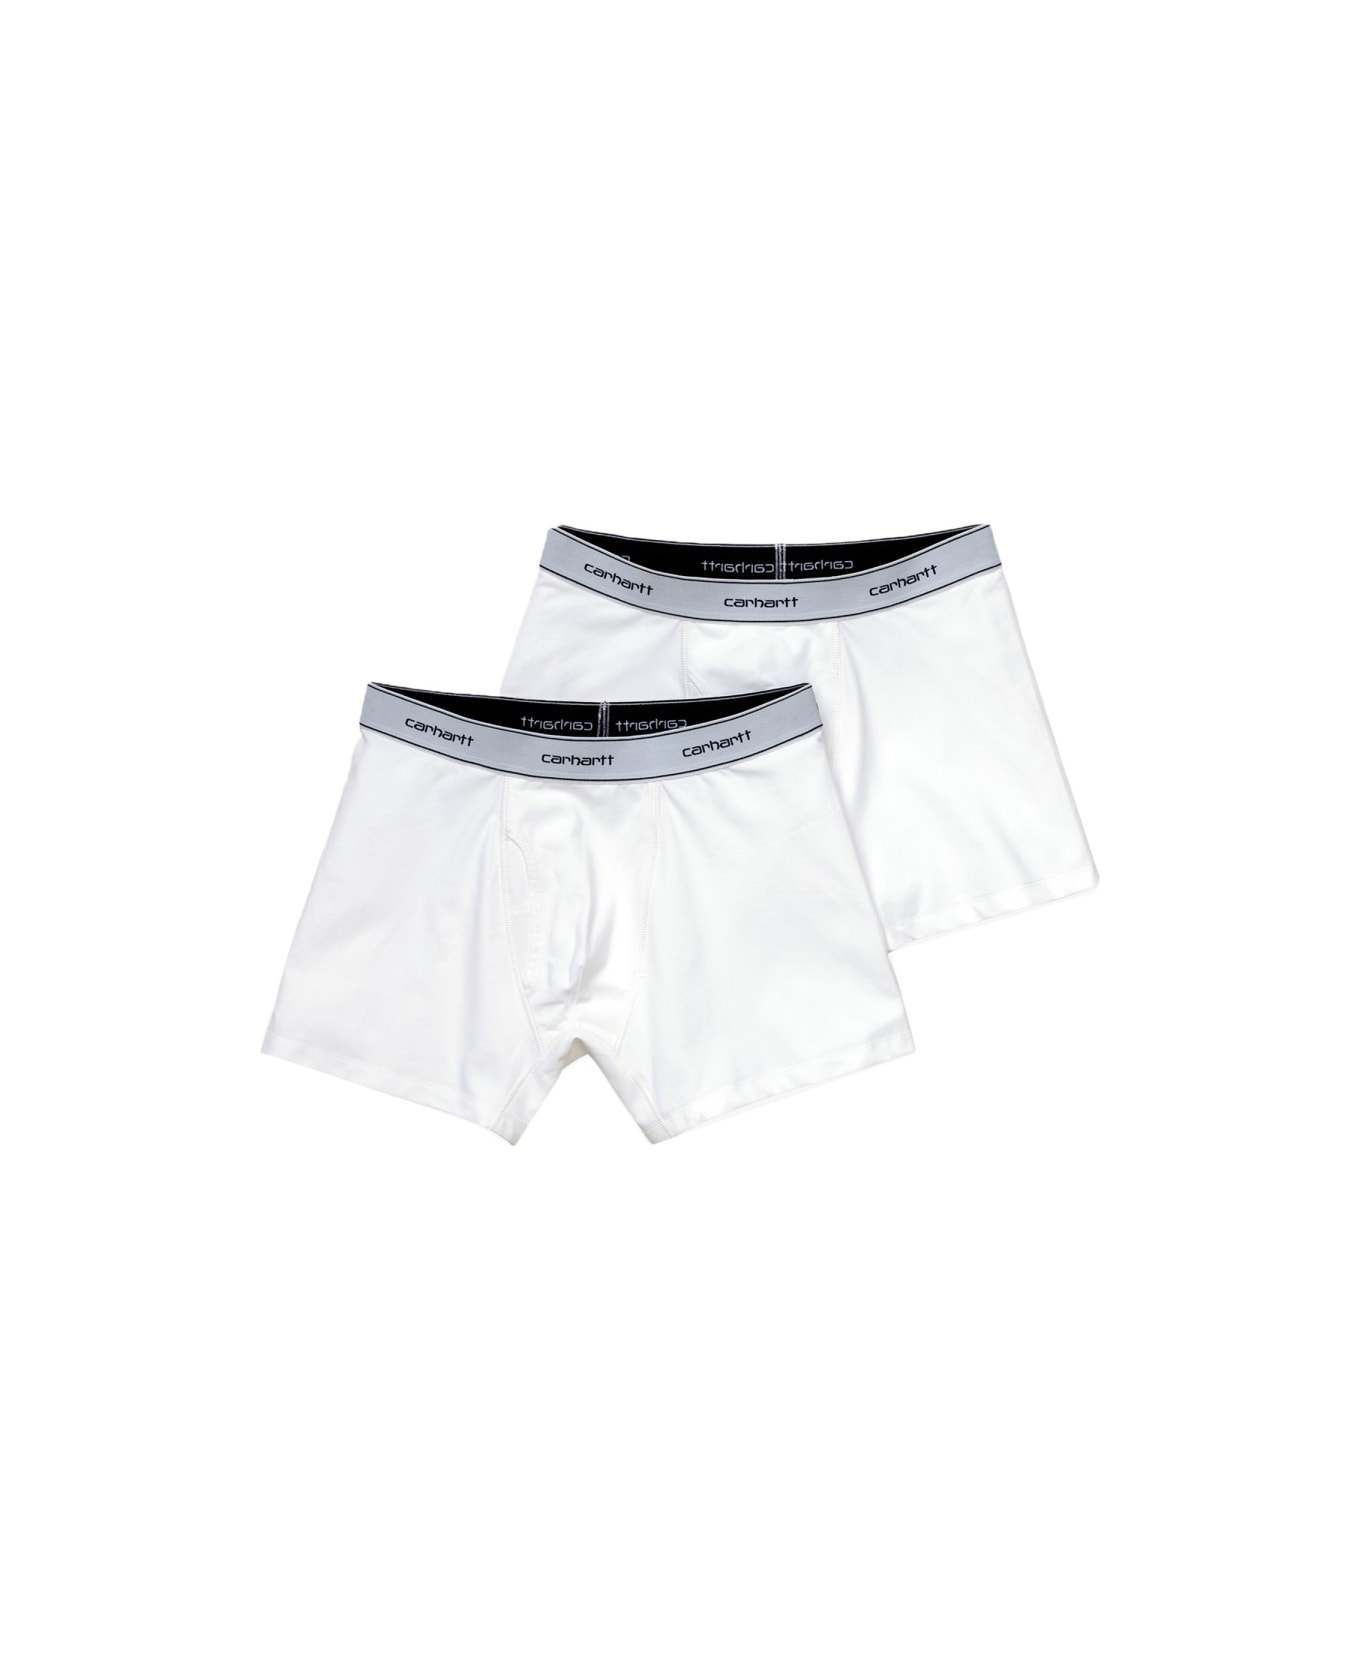 Carhartt WIP Pack Of Two Boxers - White